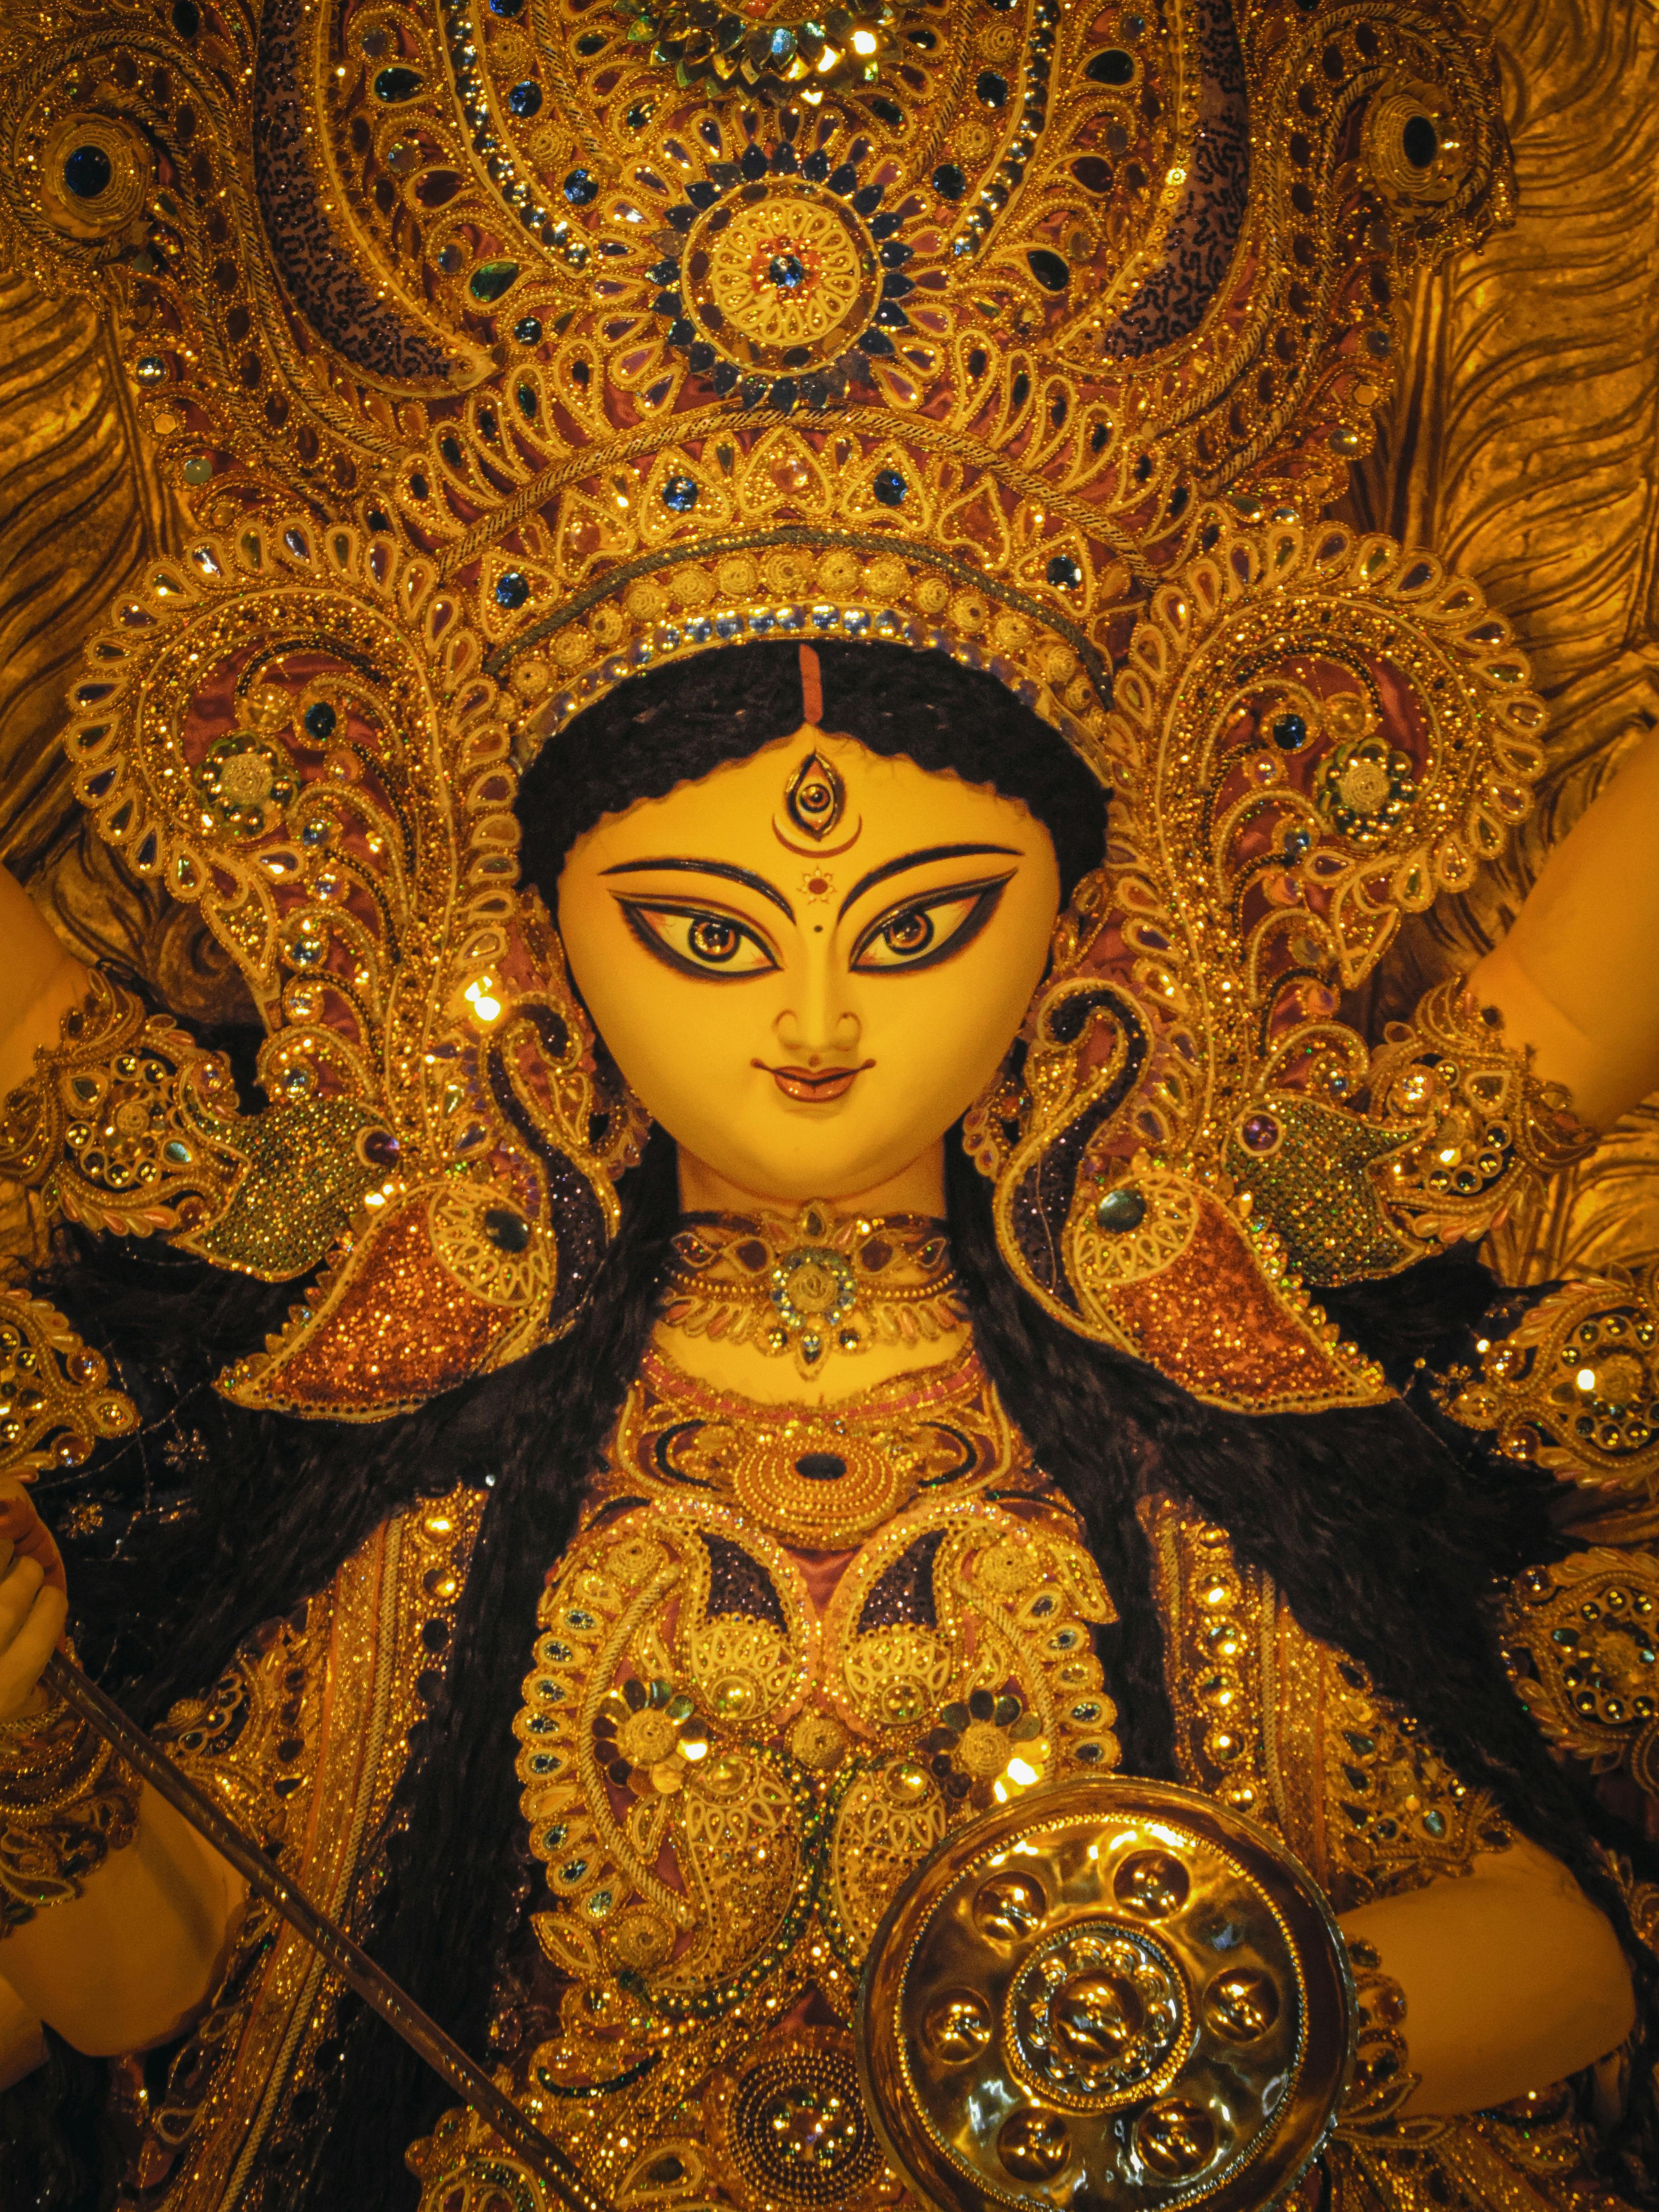 Maa Durga HD Wallpaper For Mobile APK for Android Download